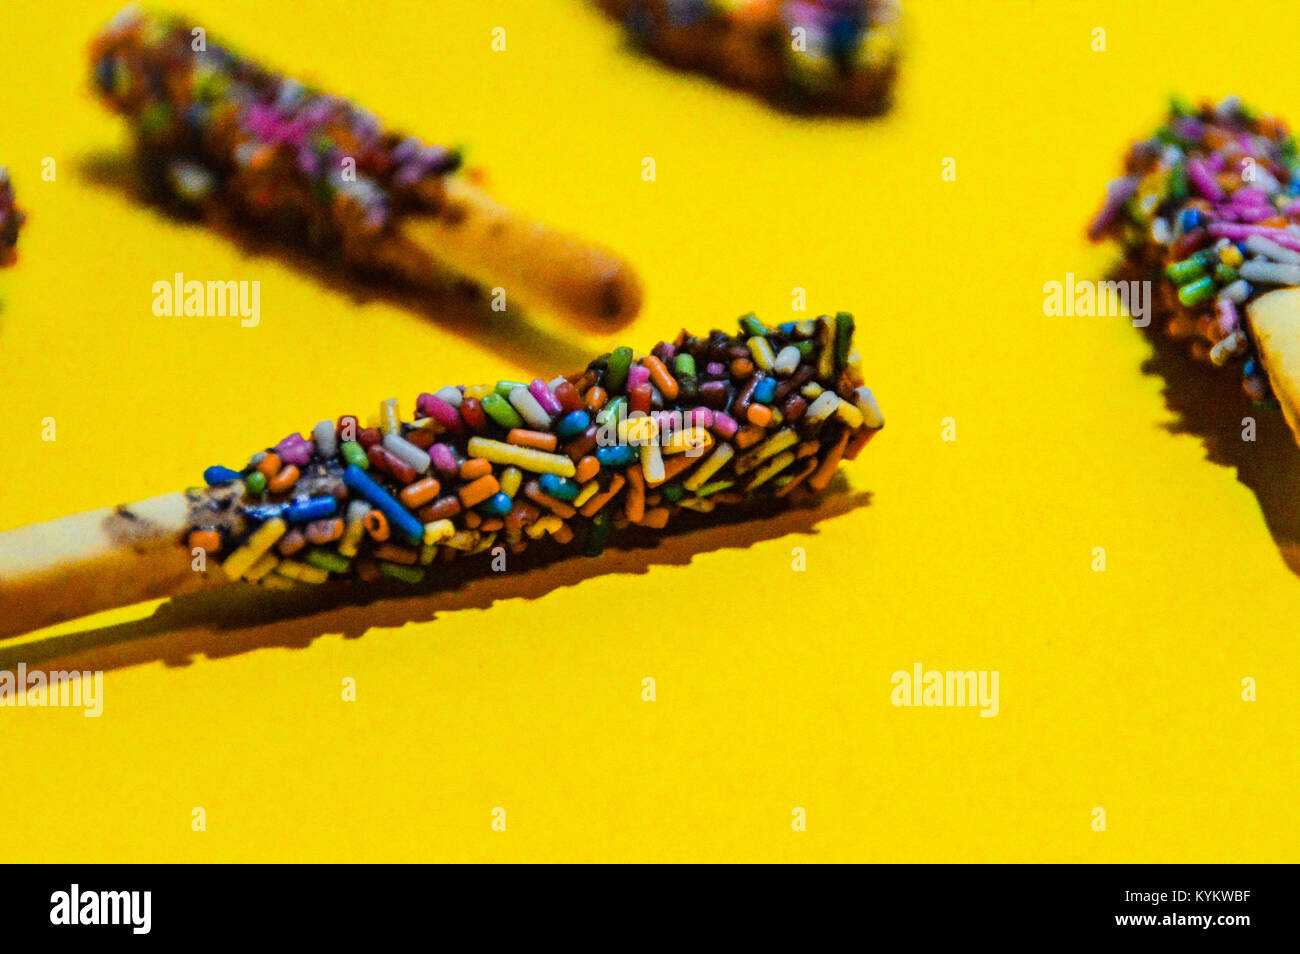 Colorful candies against a bright yellow colored background Stock Photo